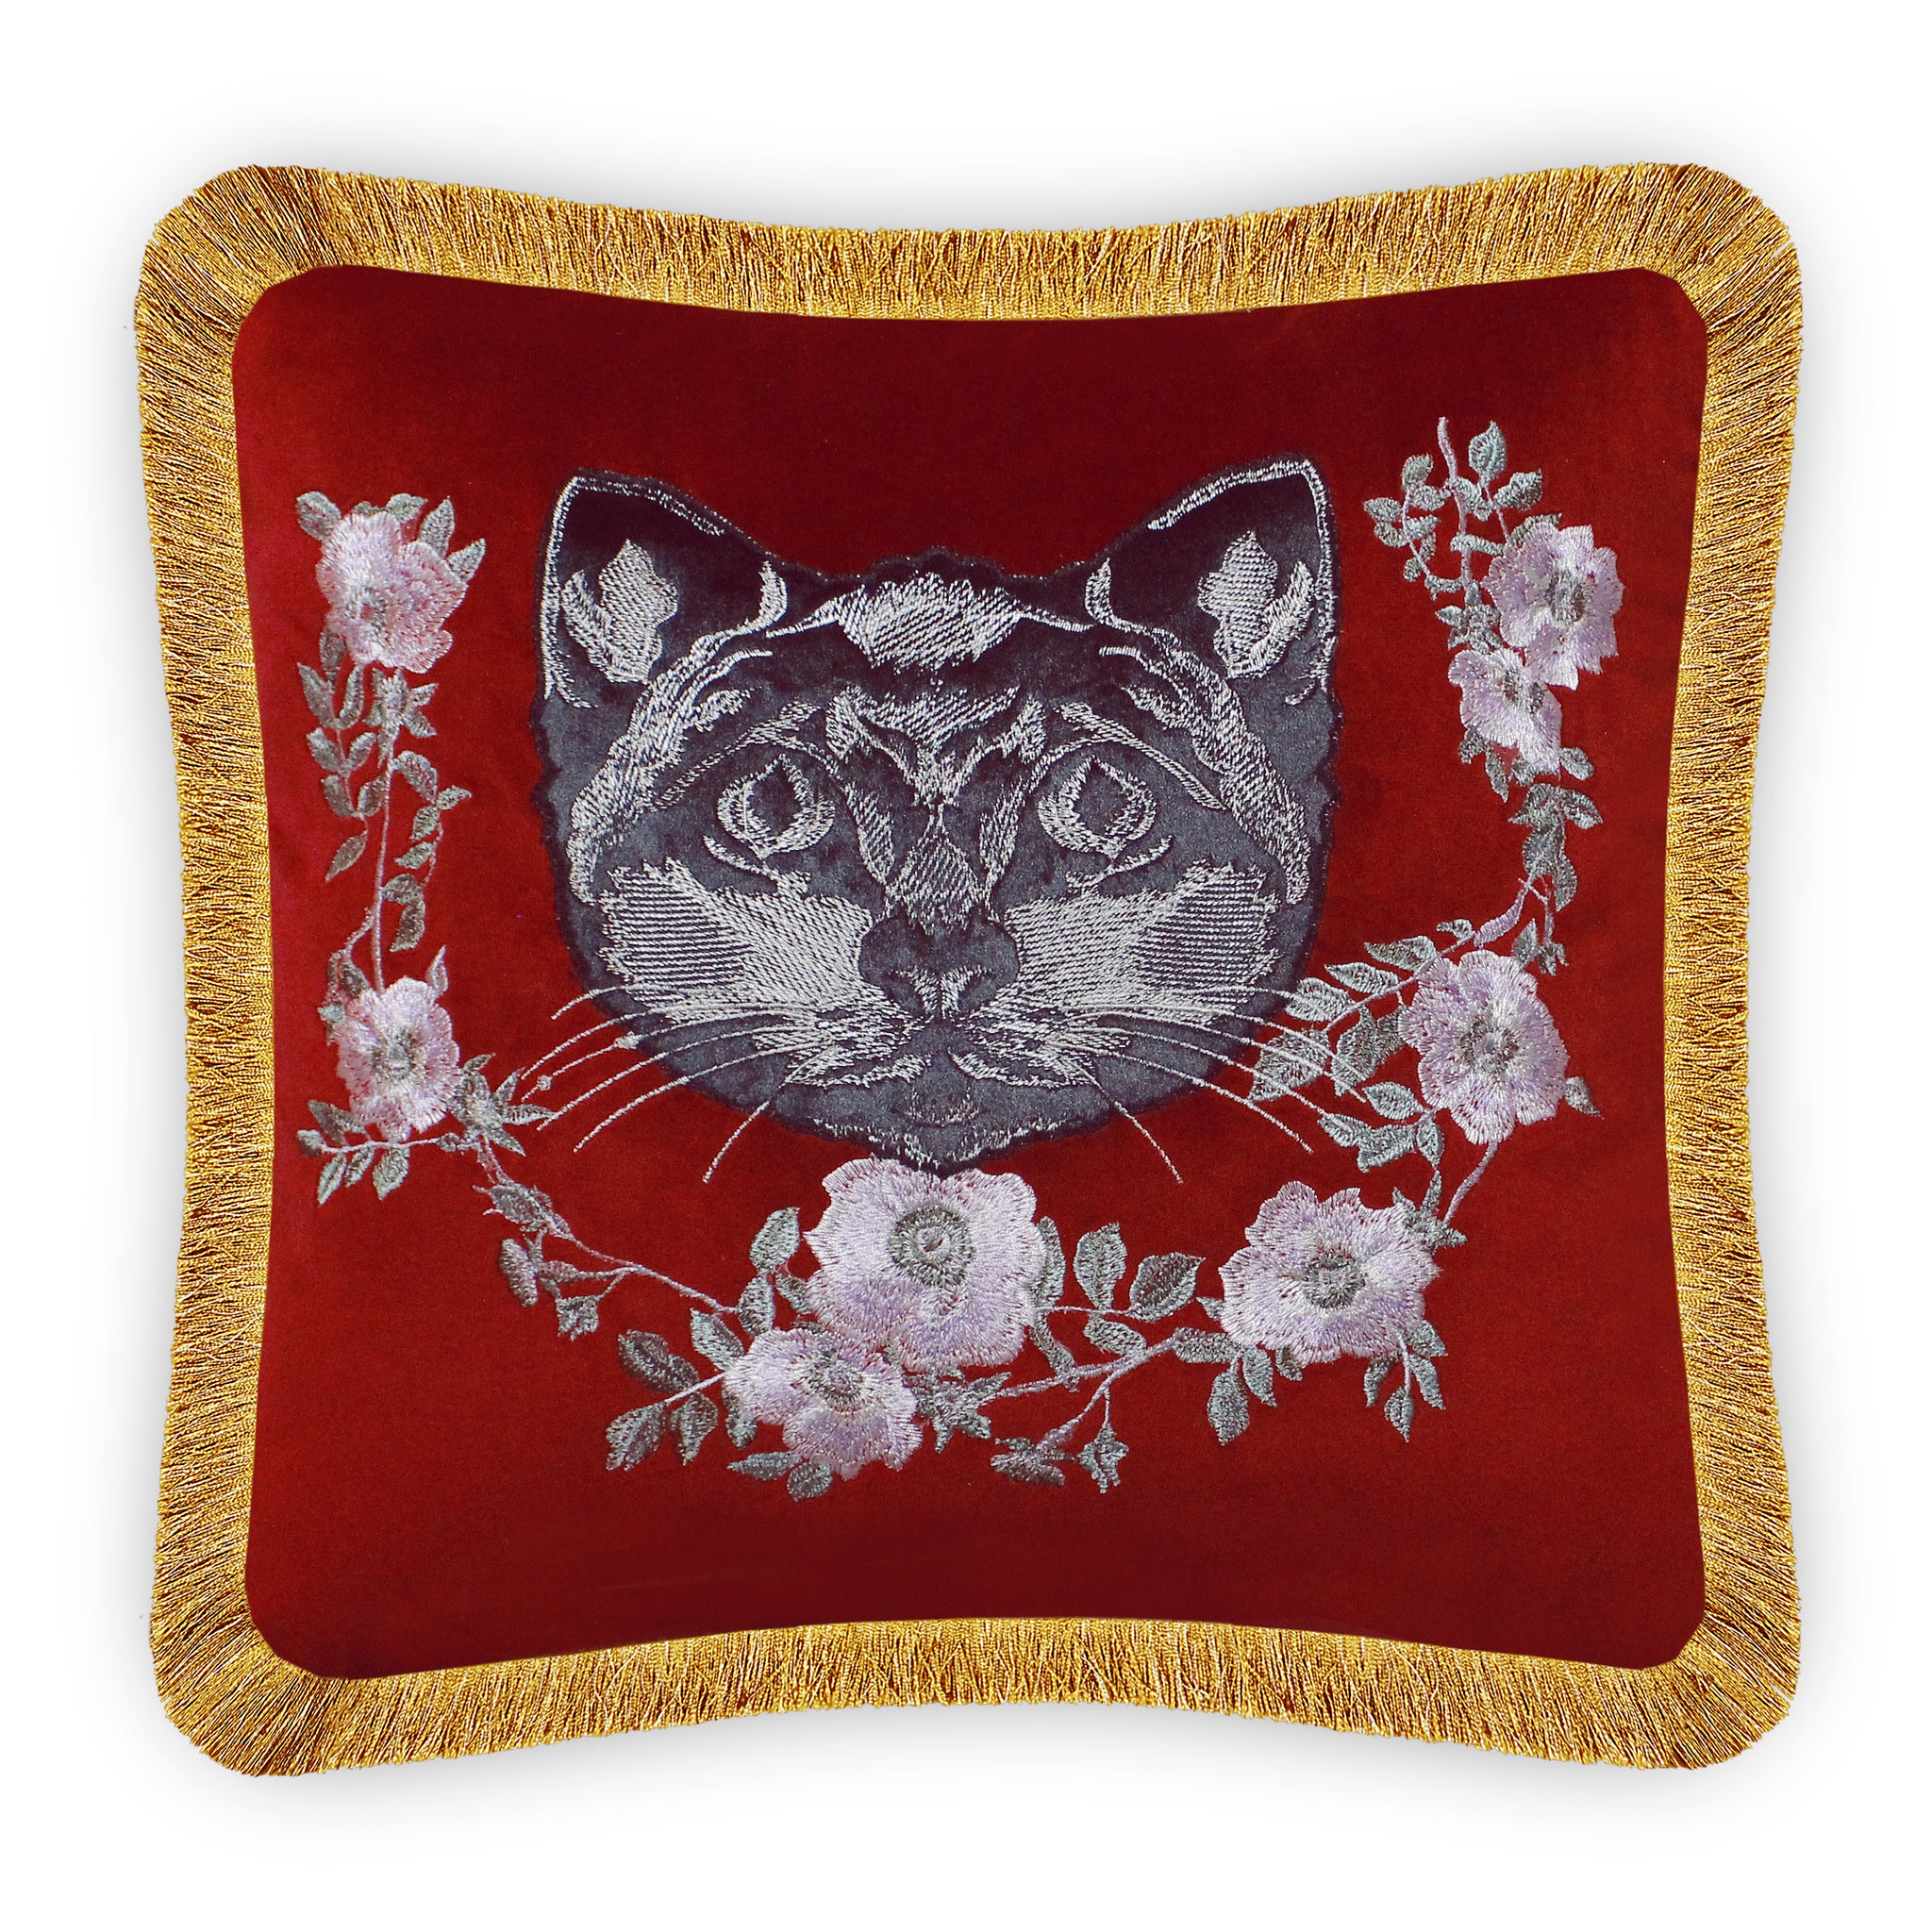 Velvet Cushion Cover Cute Cat Applique Embroidery Decorative Pillow Modern Home Decor Throw Pillow for Sofa Chair Living Room 45x45 cm 18x18 In